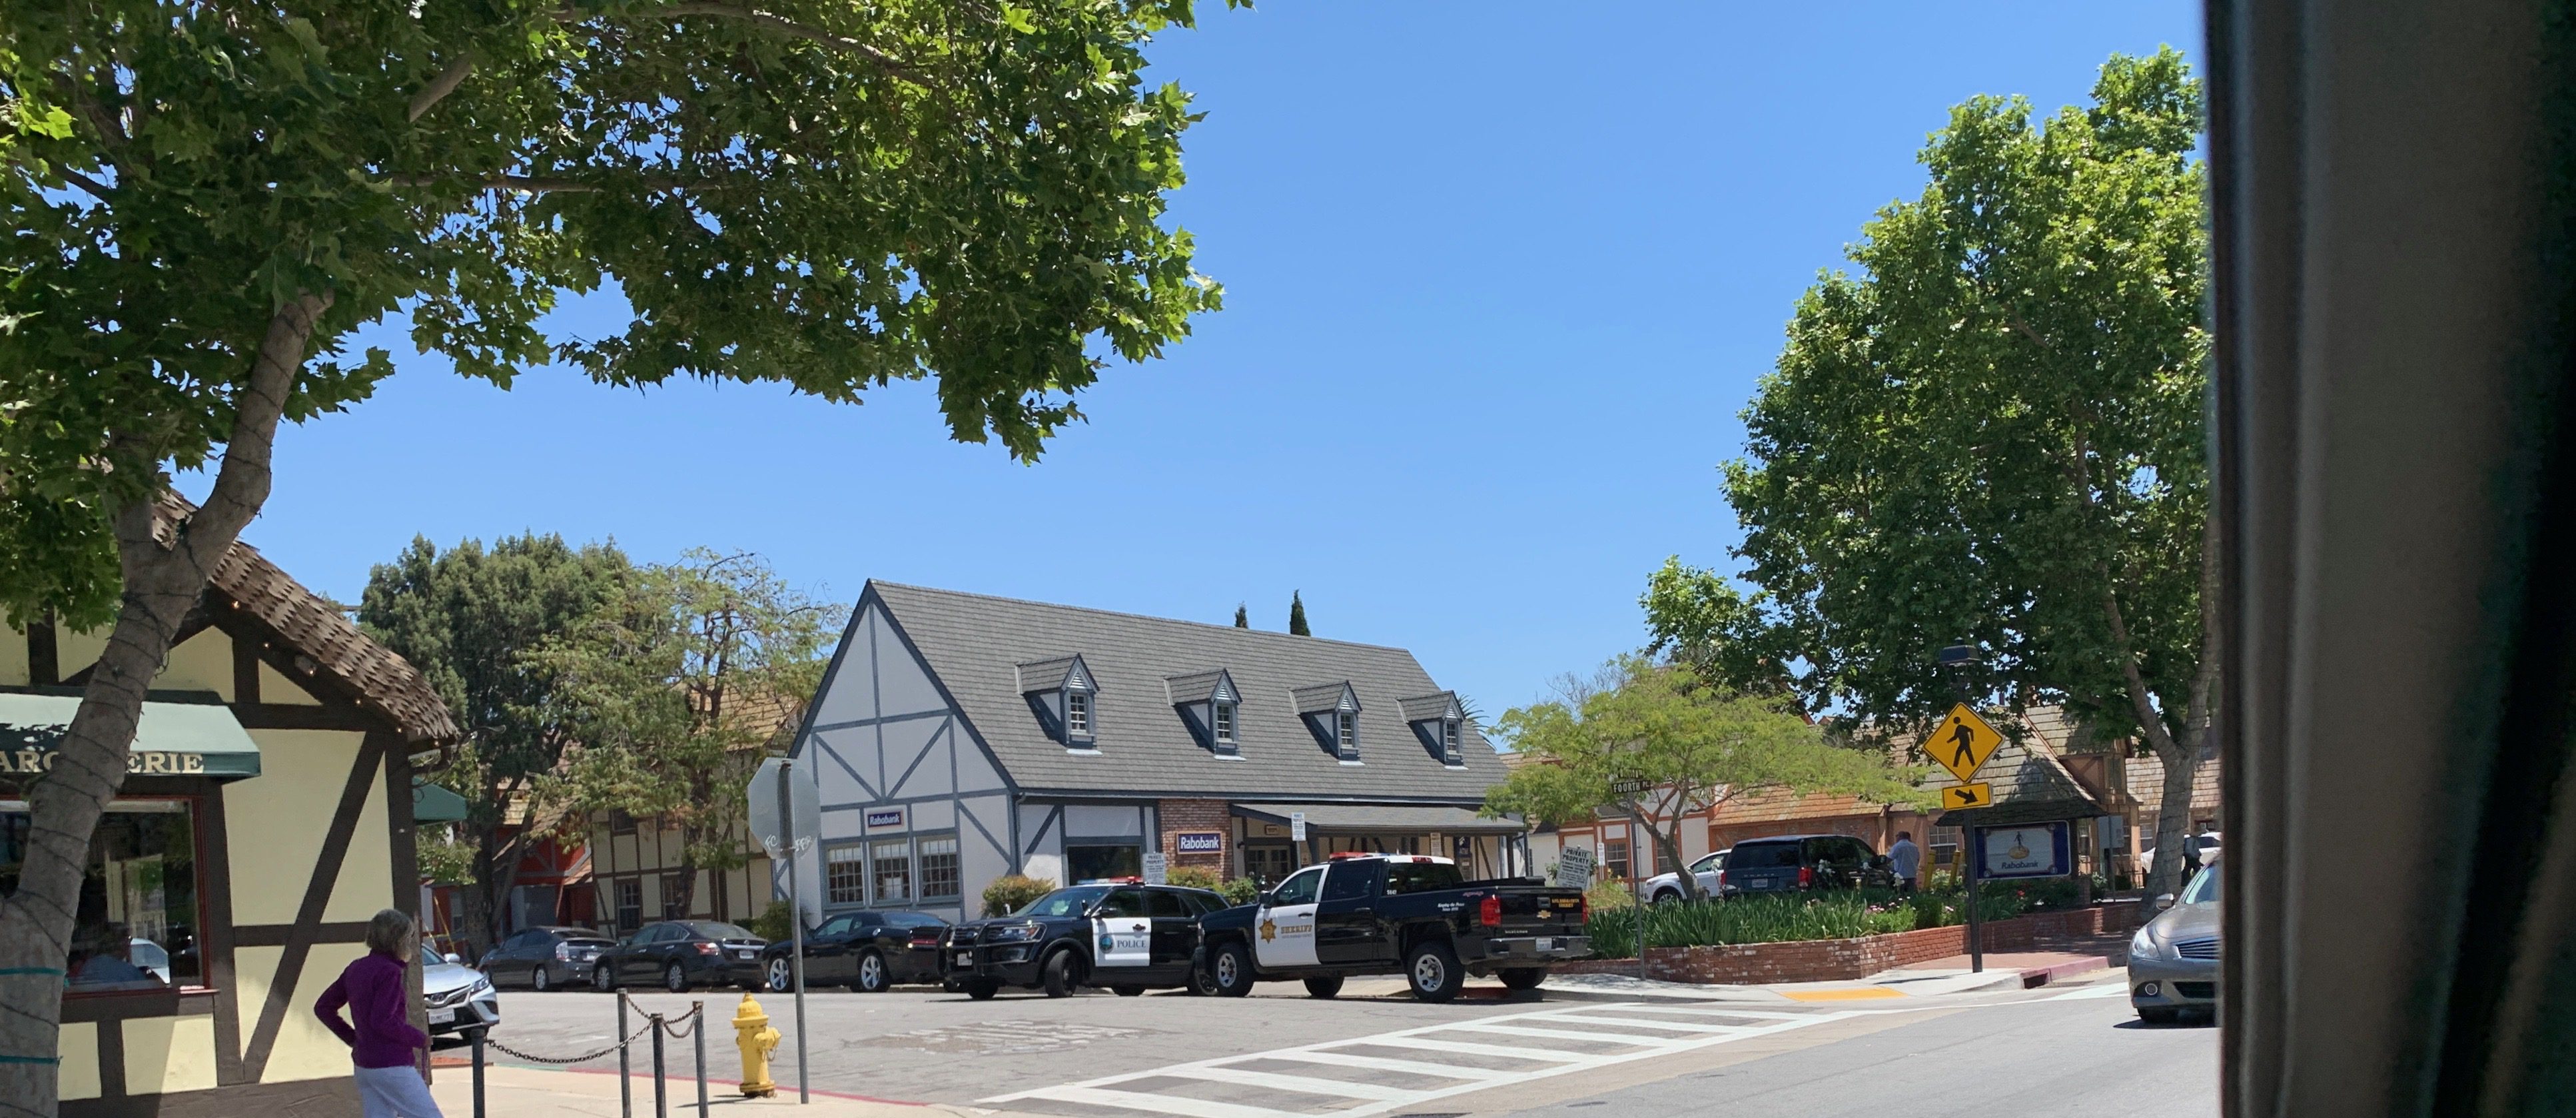 Report of a robbery at Rabobank in Solvang